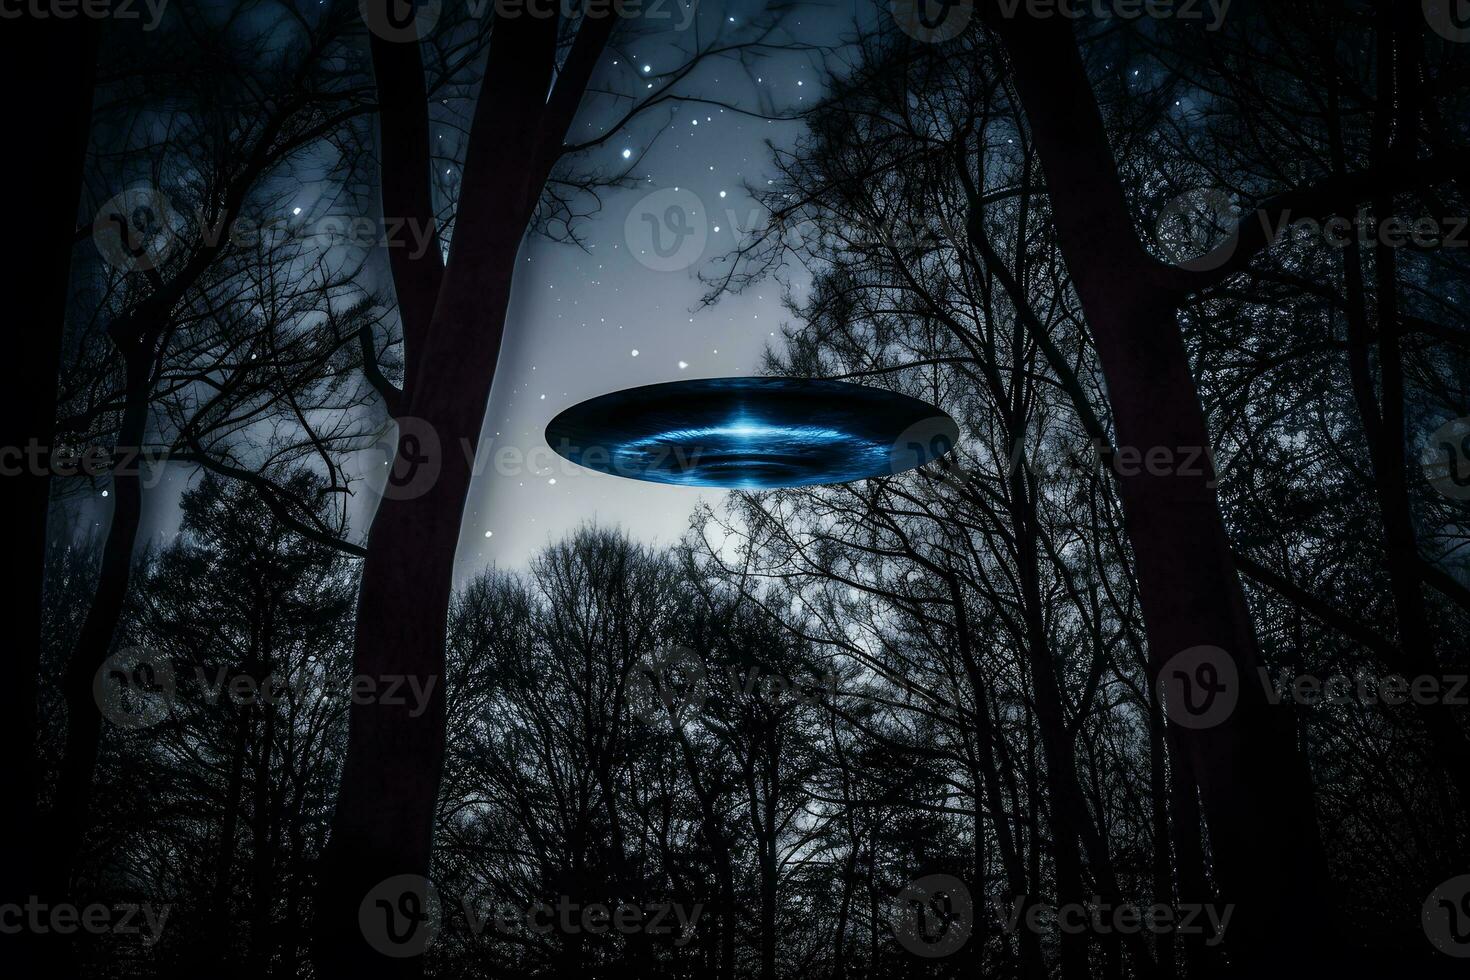 Low key image of UFO hovering over a forest at night with light beam. Neural network AI generated photo